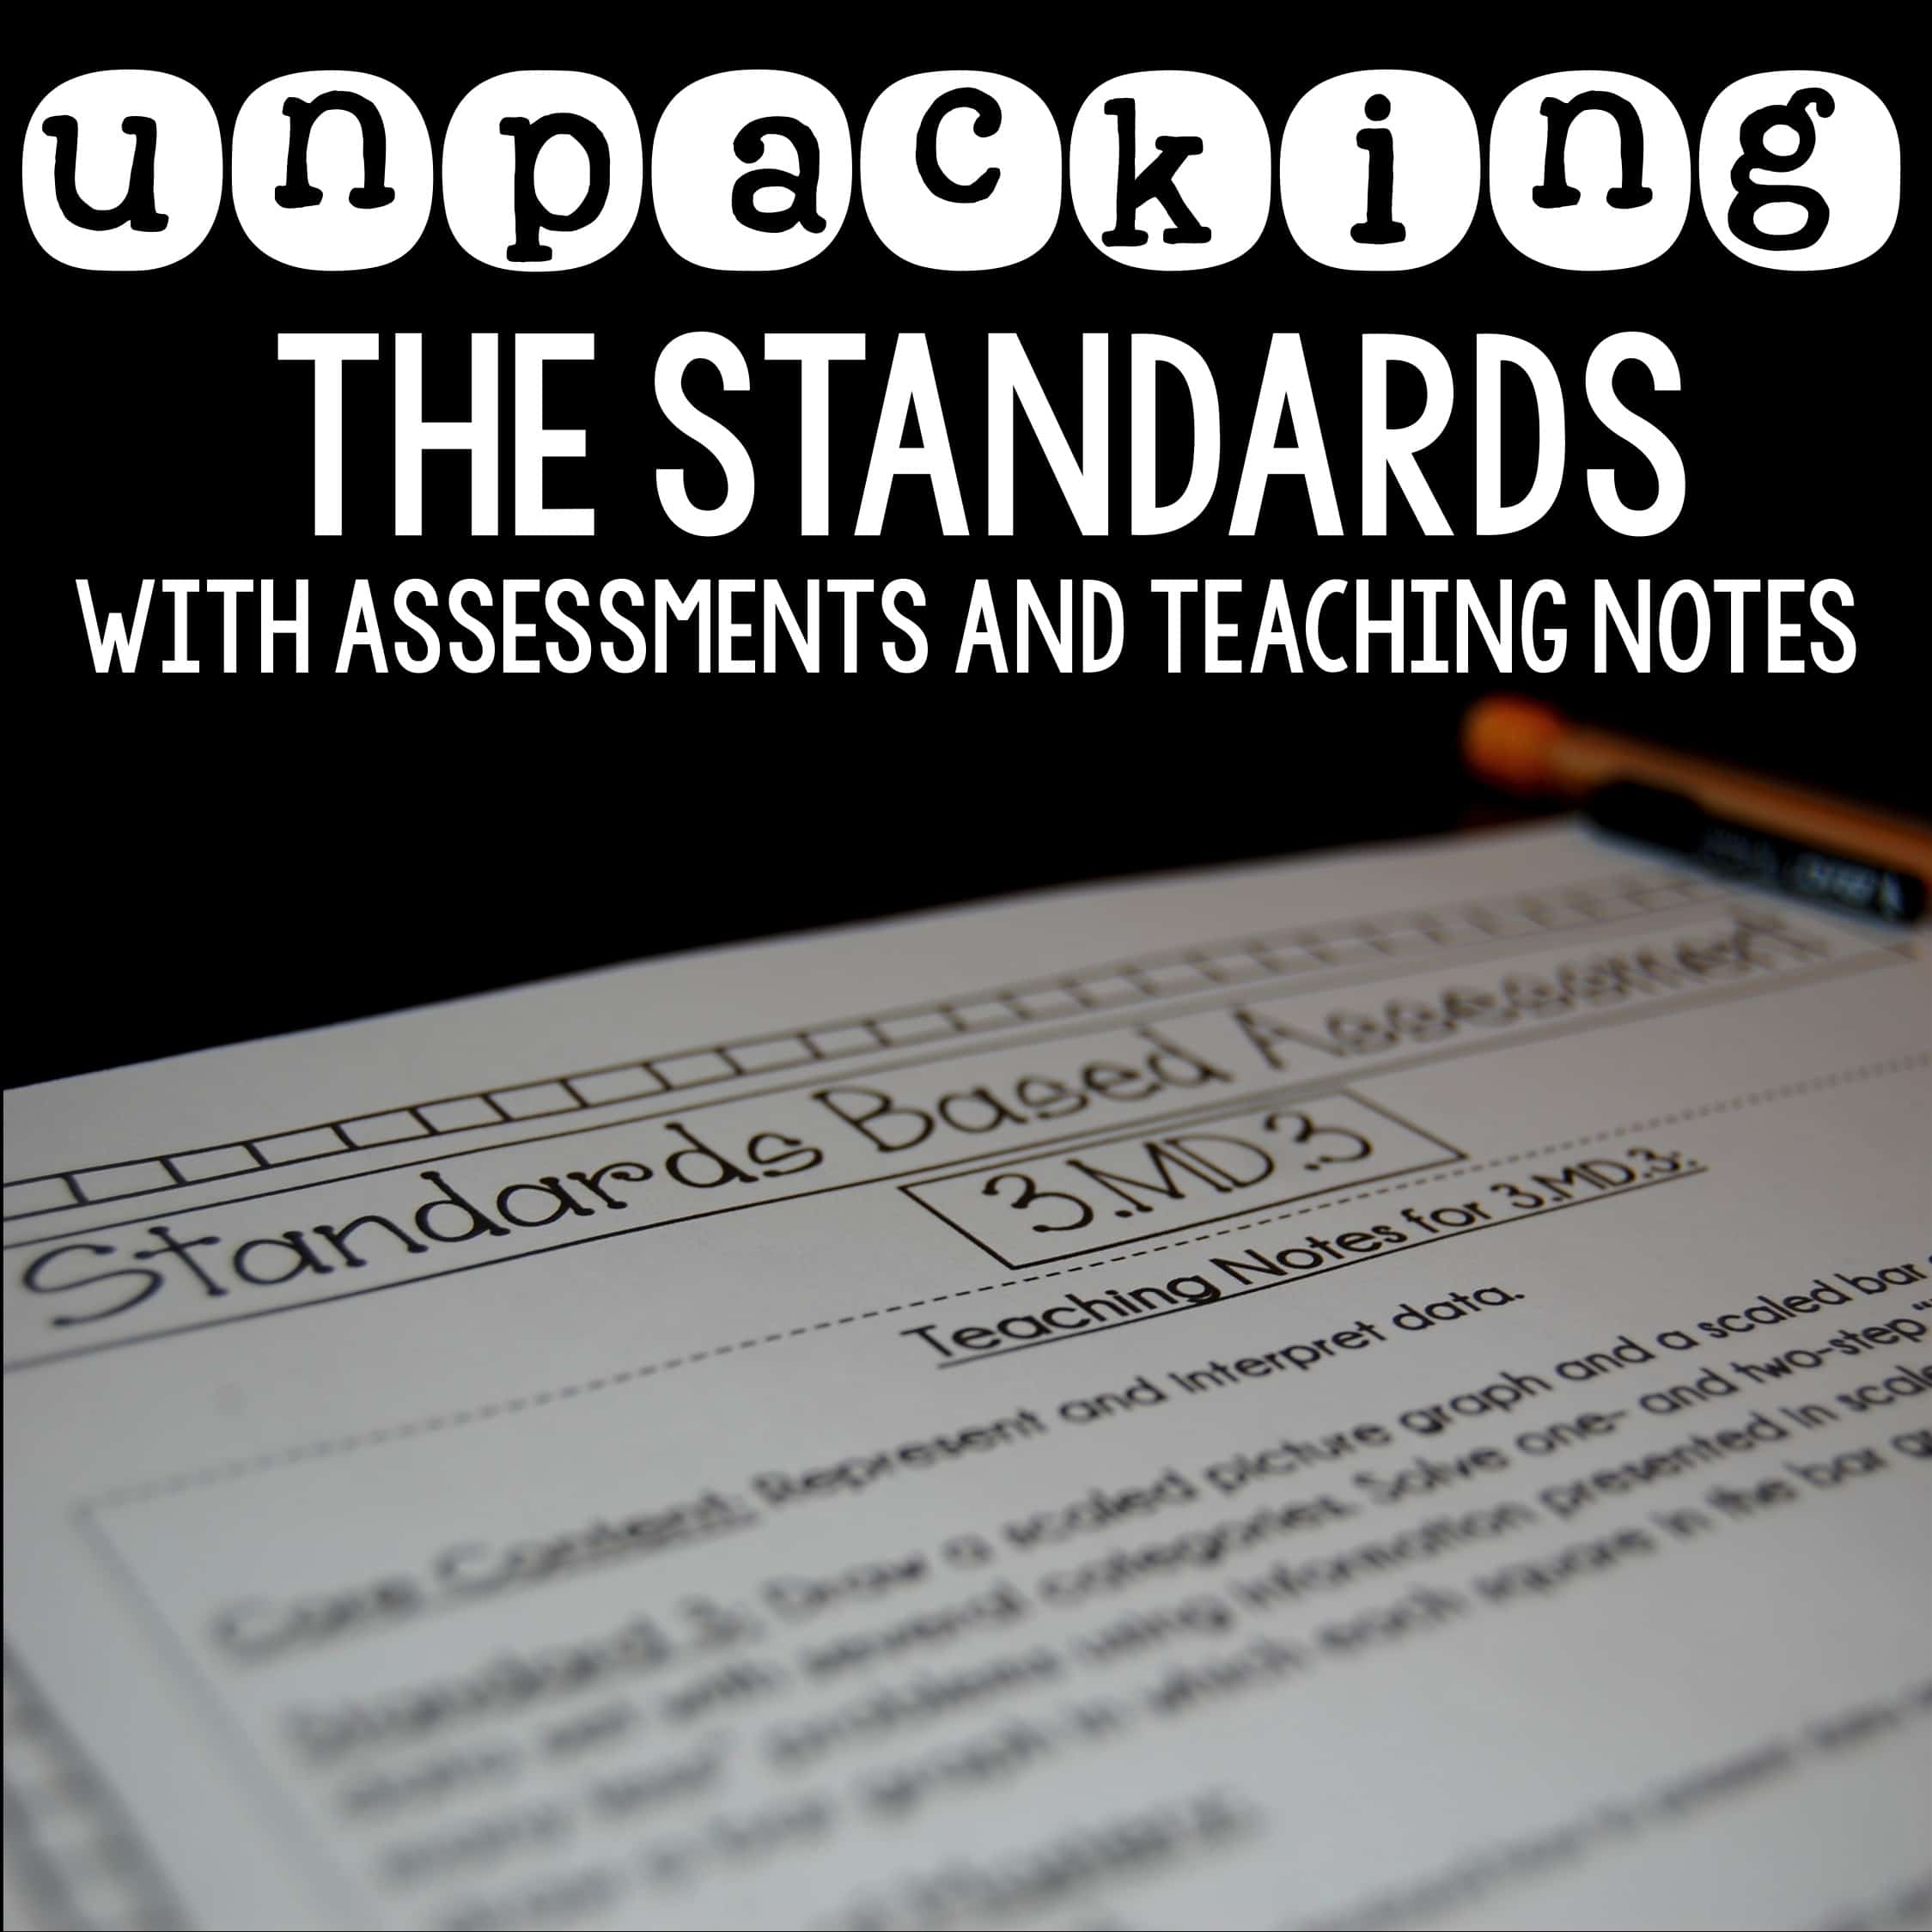 Unpacking the Standards: Assessments and Teaching Notes for Math and English Language Arts {Aligned to Student Data Tracking Binders}